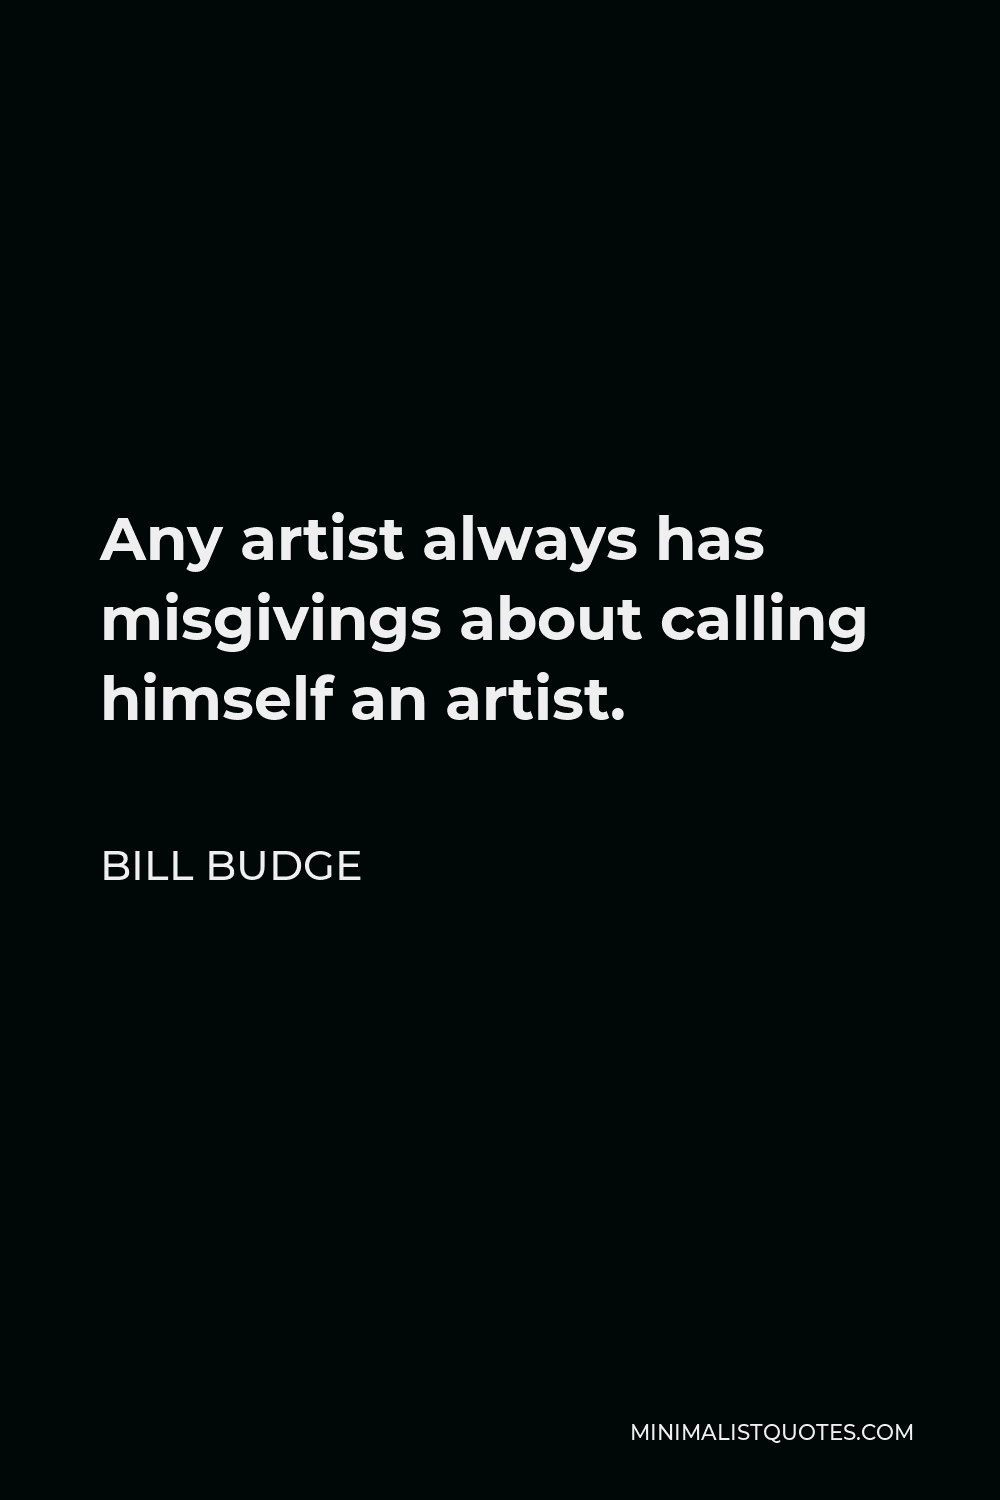 Bill Budge Quote - Any artist always has misgivings about calling himself an artist.